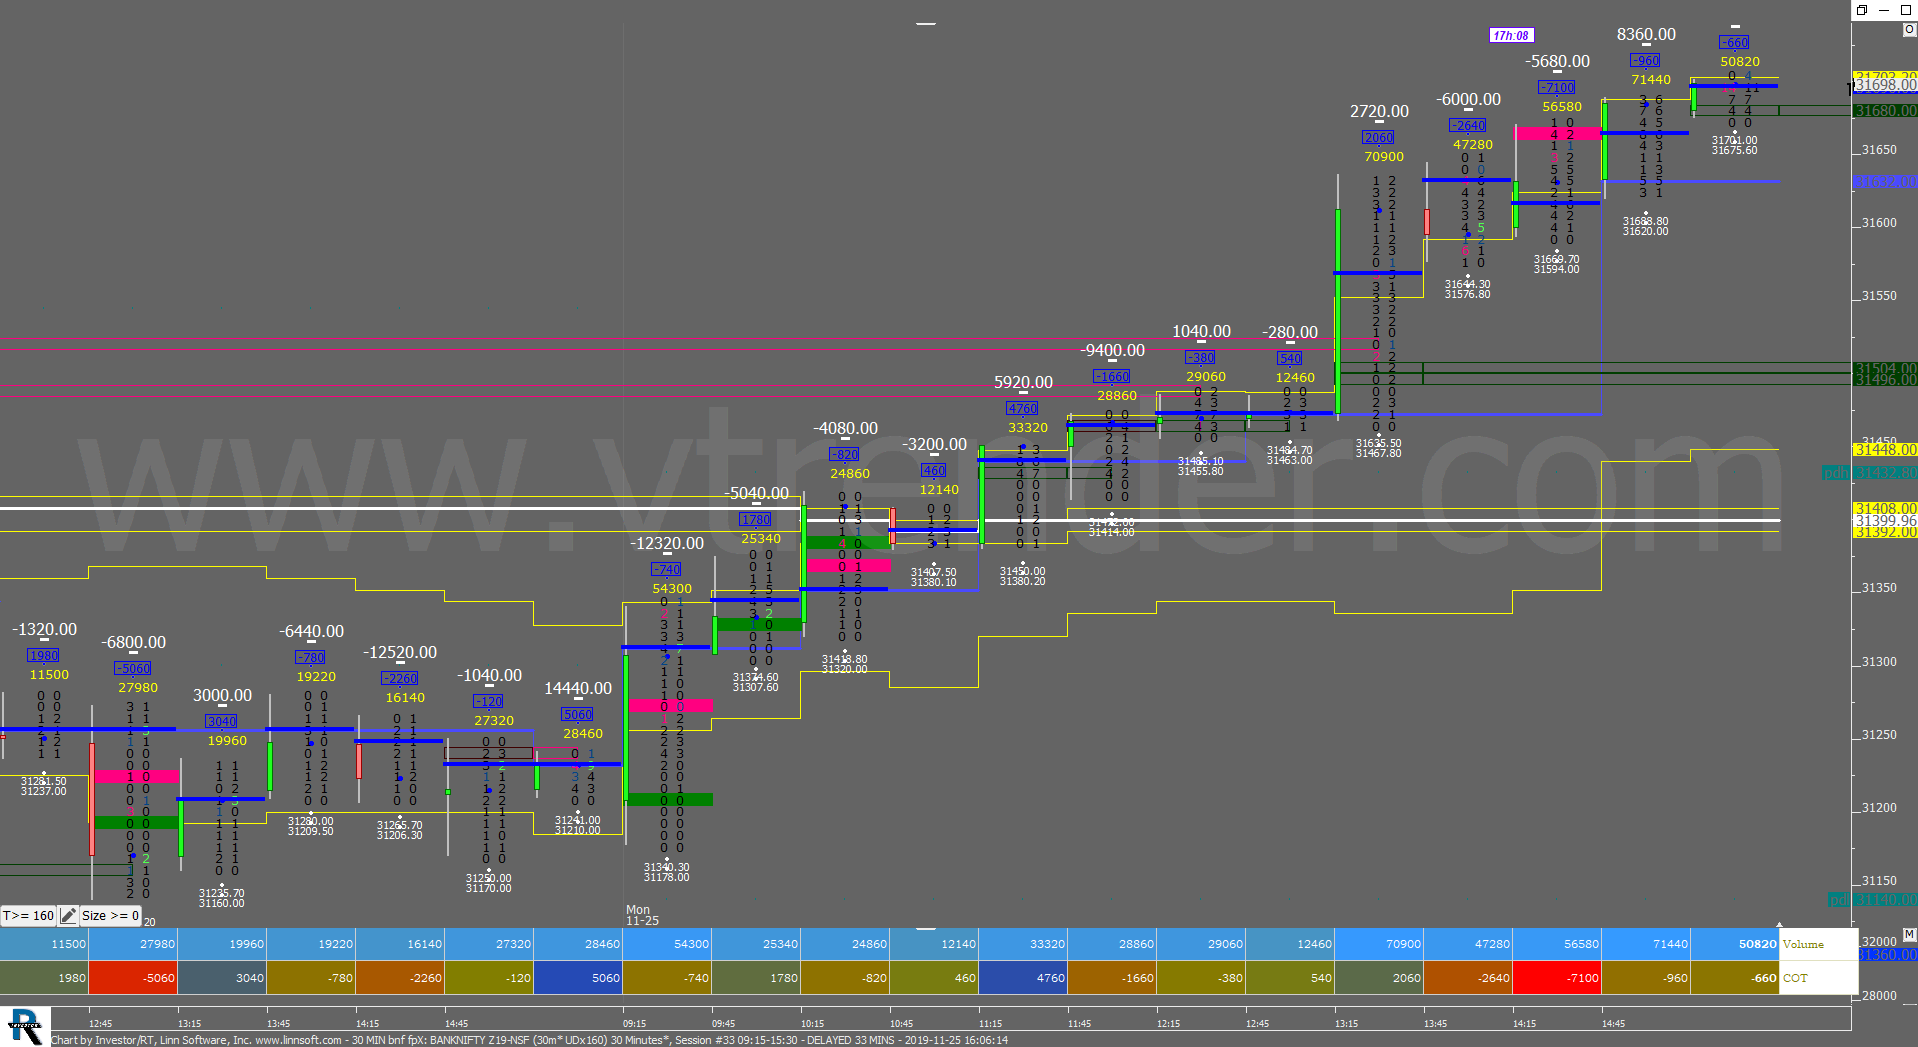 30 Min Bnf Fpx Dec 1 Order Flow Charts Dated 27Th Nov Banknifty Futures, Day Trading, Intraday Trading, Intraday Trading Strategies, Nifty Futures, Order Flow Analysis, Support And Resistance, Trading Strategies, Volume Profile Trading